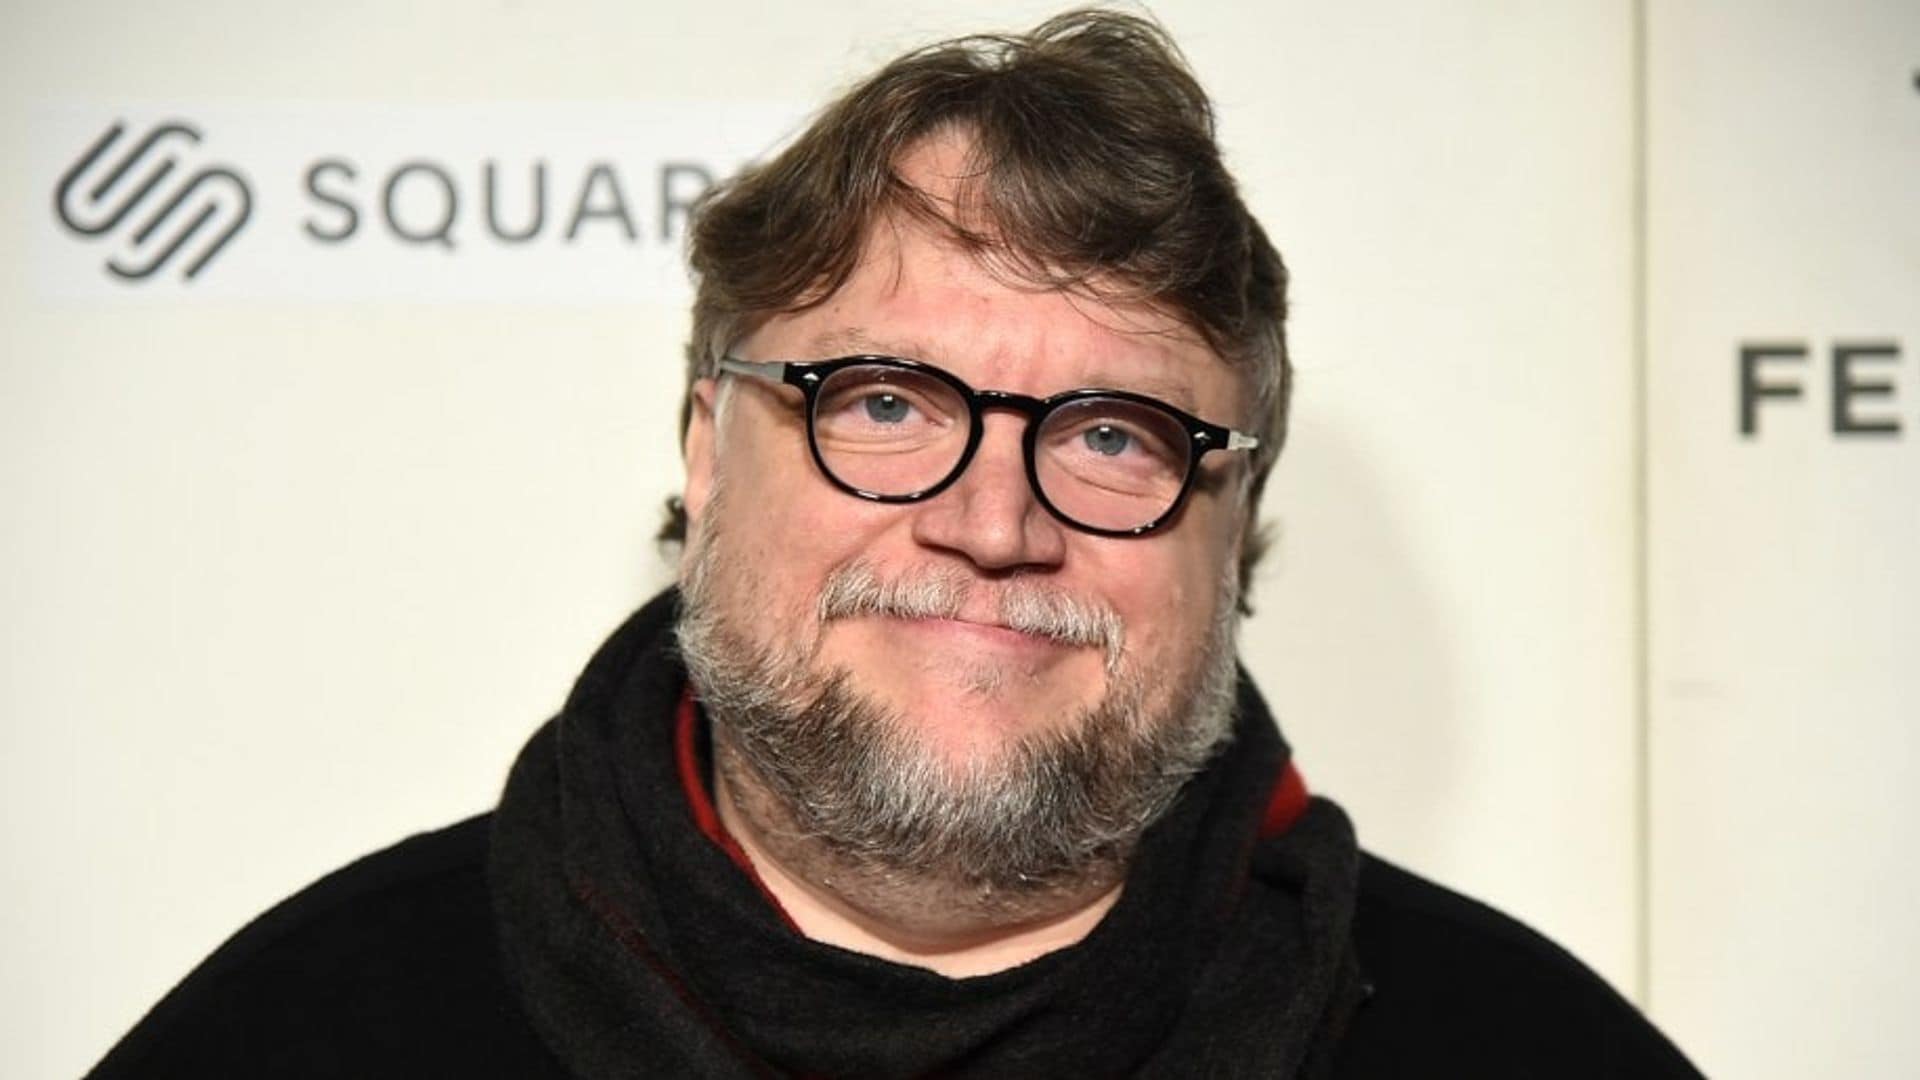 'The Shape of Water' Director Guillermo del Toro changed these students' lives with a simple gesture